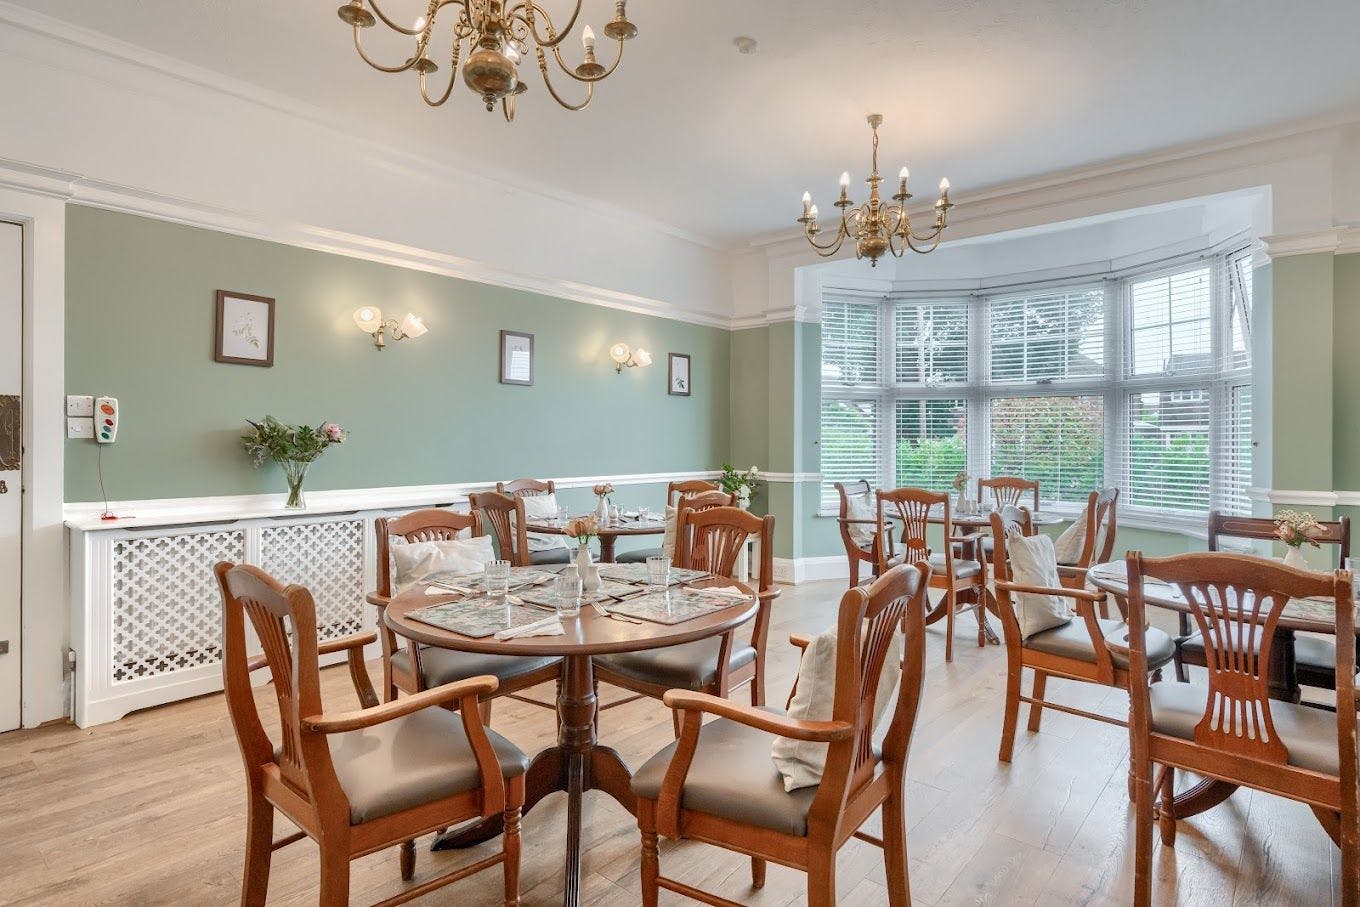 Dining area of Meadowcroft care home in Shoreham-on-Sea